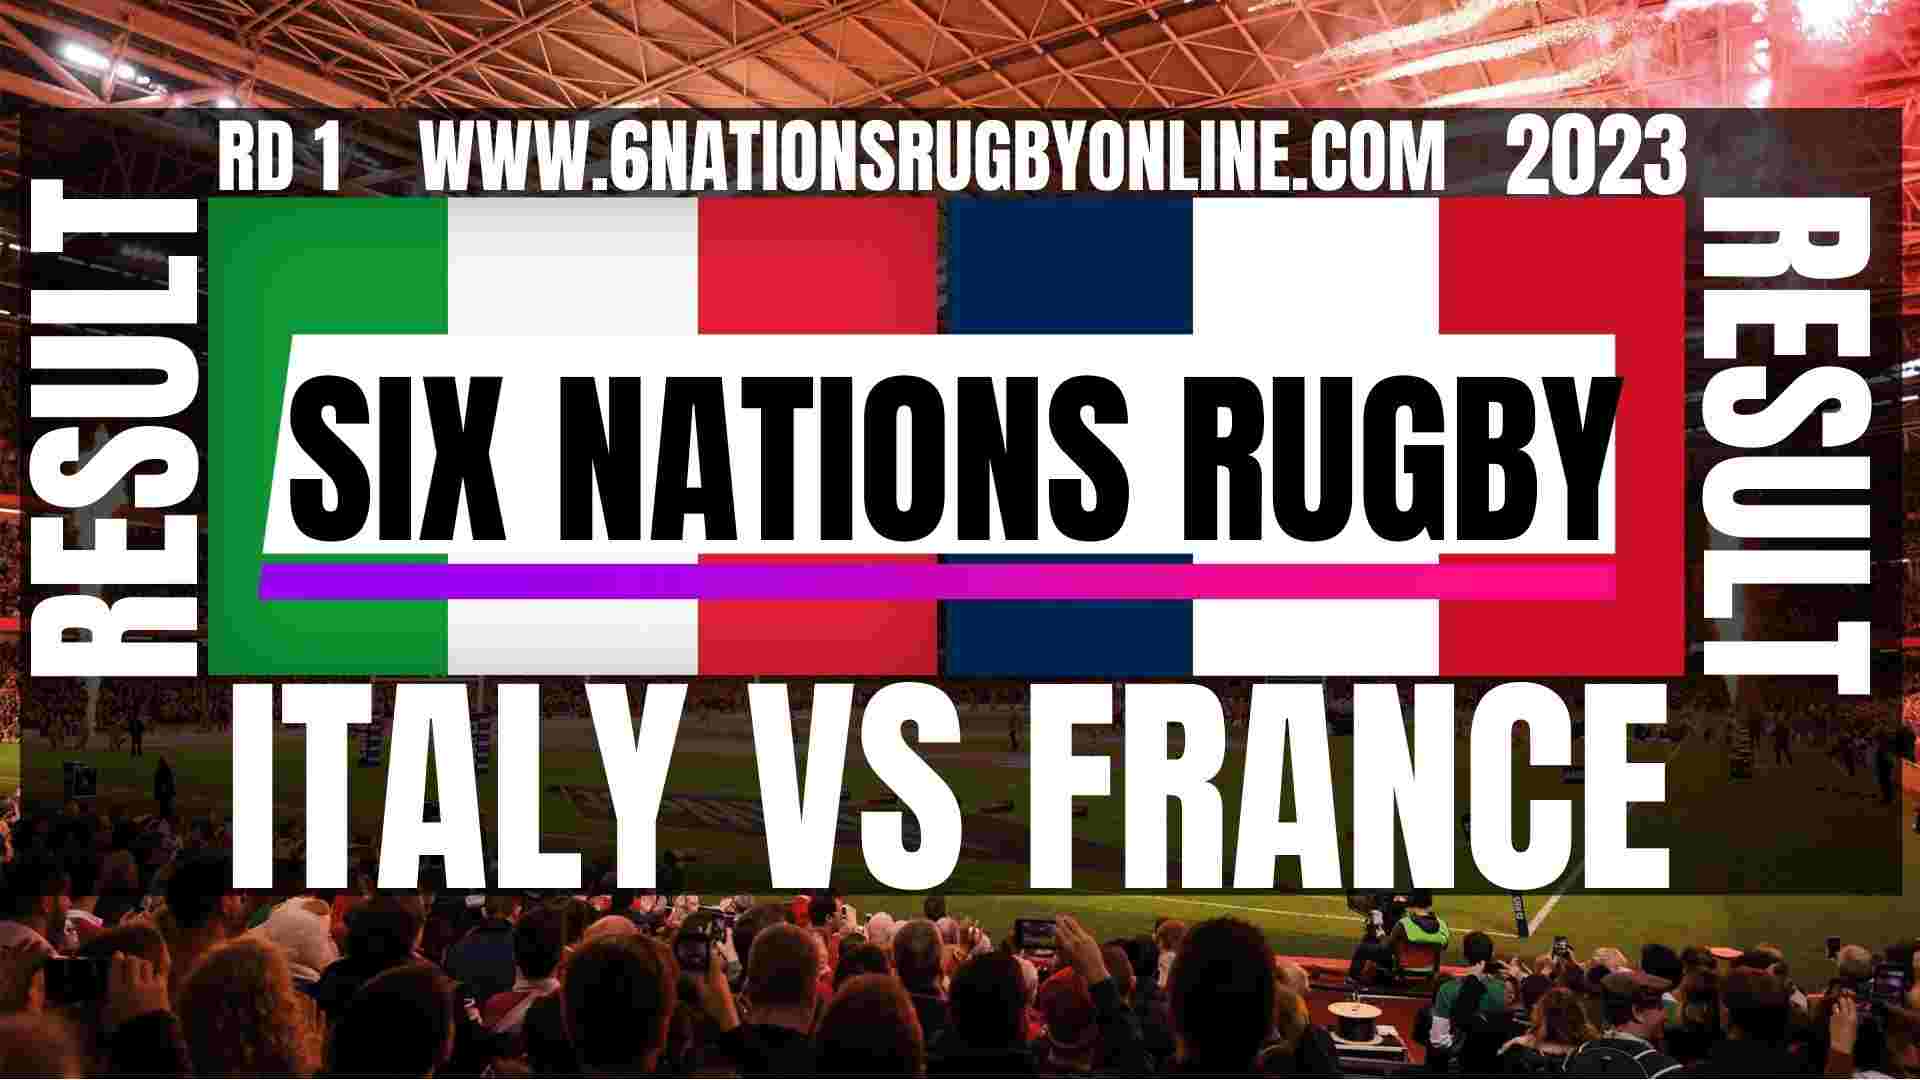 Italy vs France RD 1 Result 2023 | Six Nations Rugby